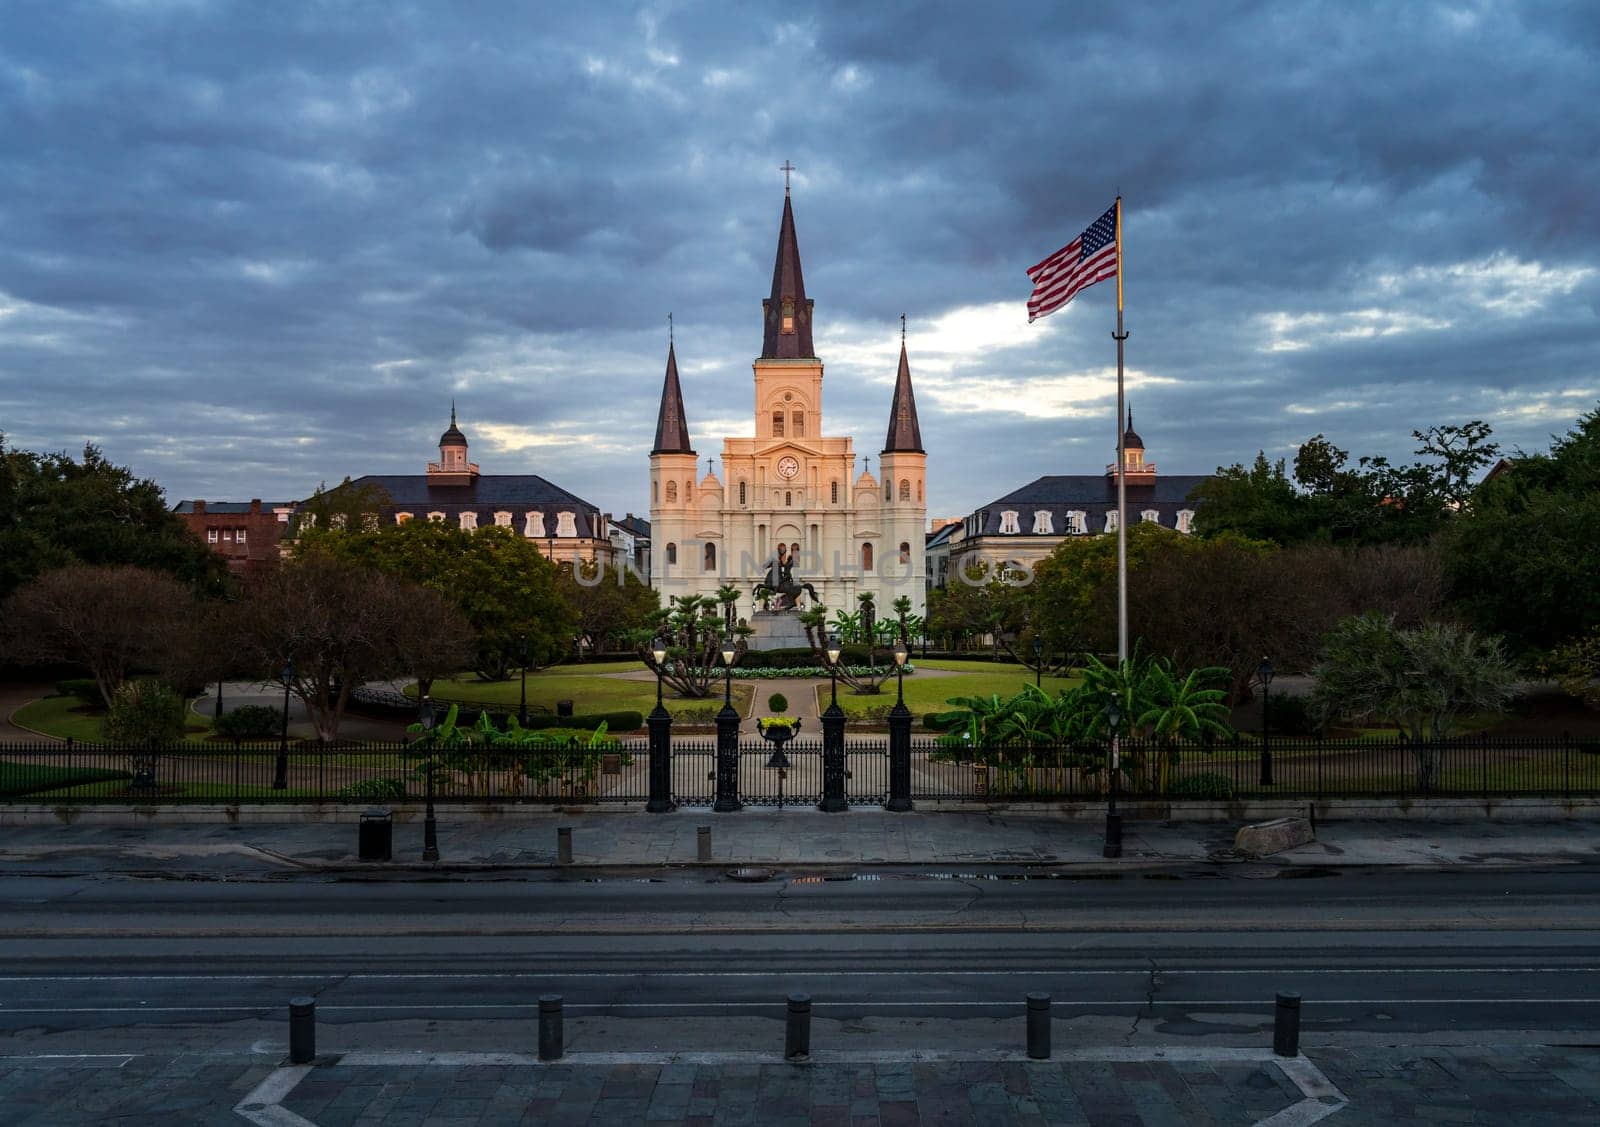 Sunrise on Cathedral Basilica of Saint Louis in New Orleans, LA by steheap